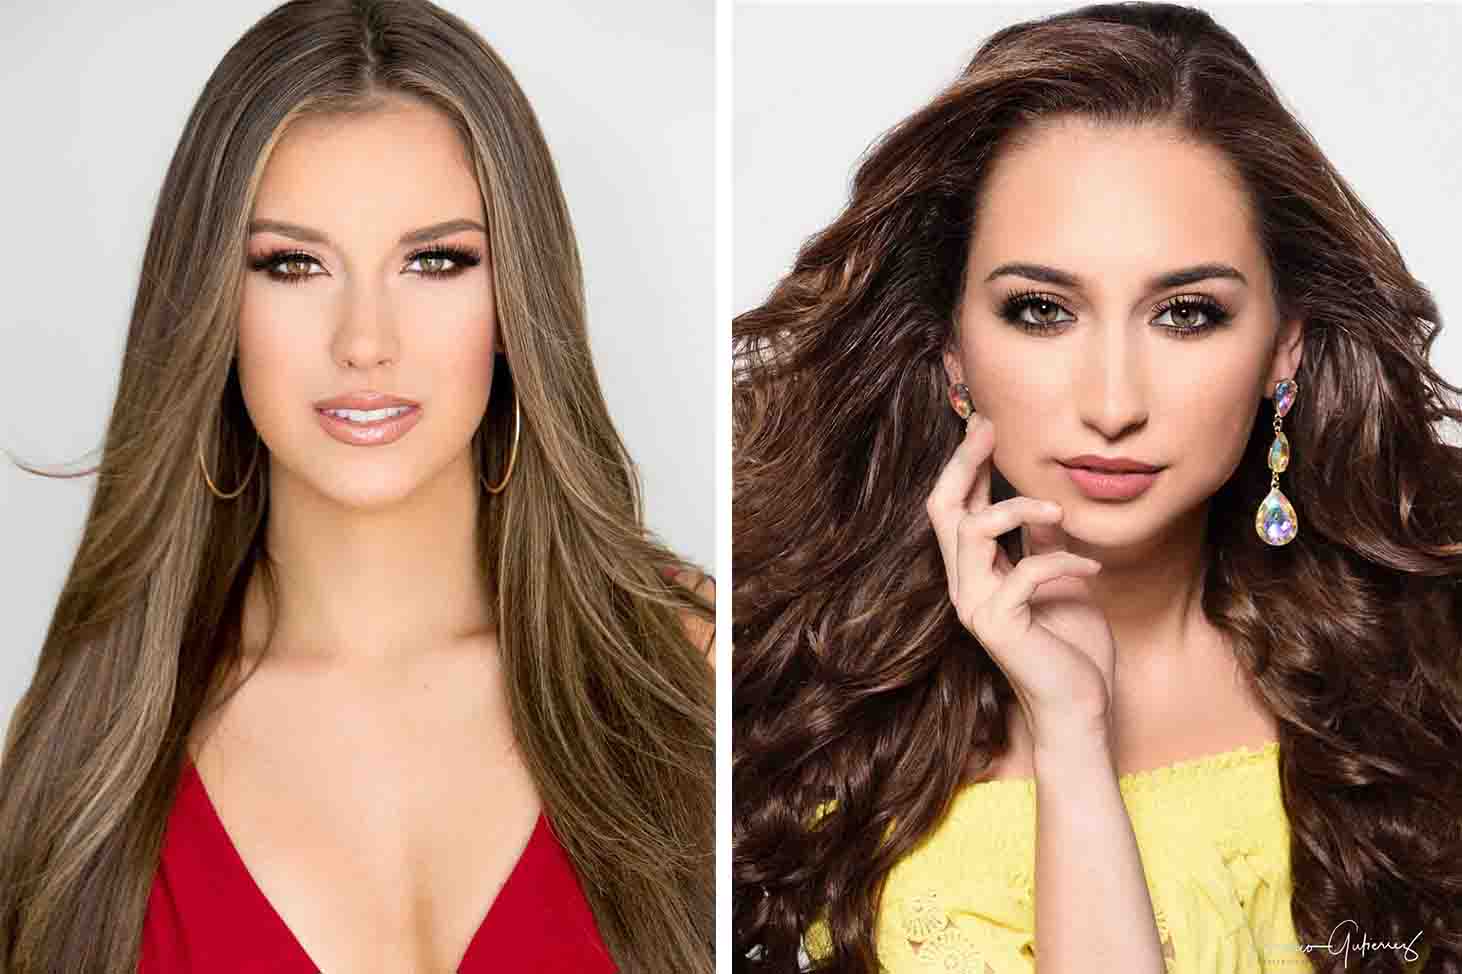 Meet the 2019 Miss Texas USA pageant contestants.